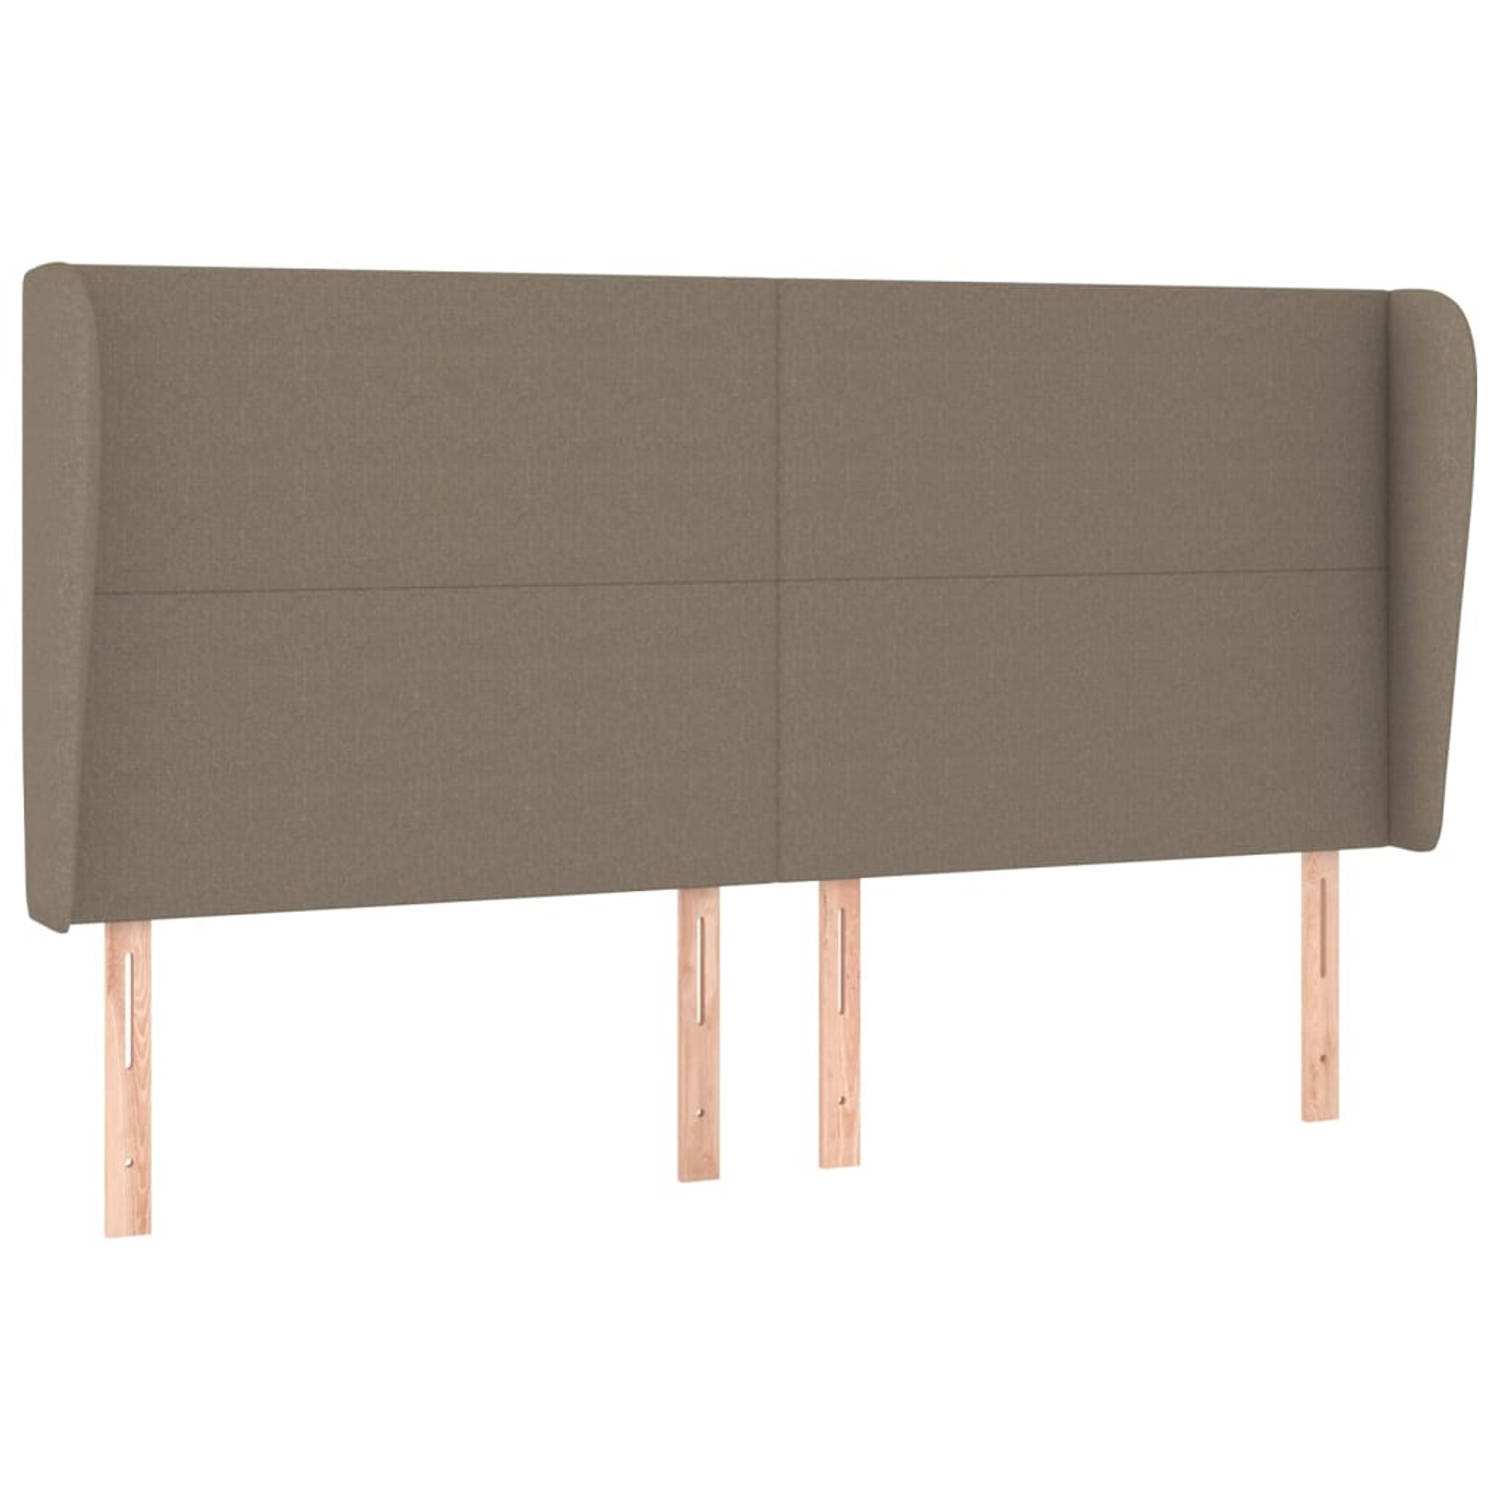 The Living Store Hoofdeind Bedombouw - 163 x 23 x 118/128 cm - Taupe